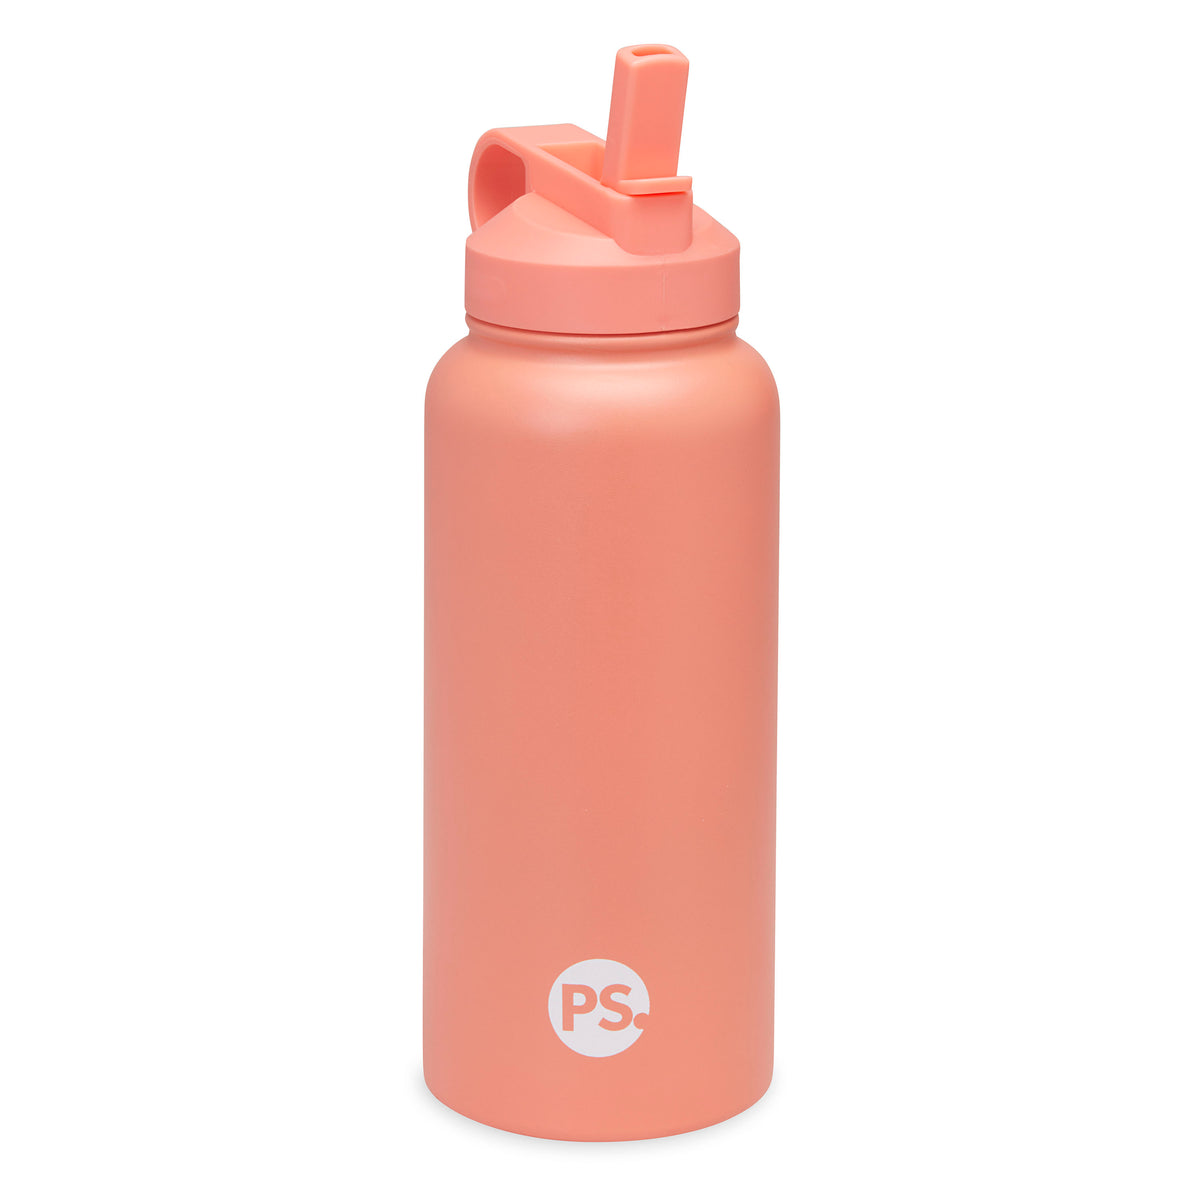 Gaiam 32oz Water Bottle Gift Pack Coral with straw top